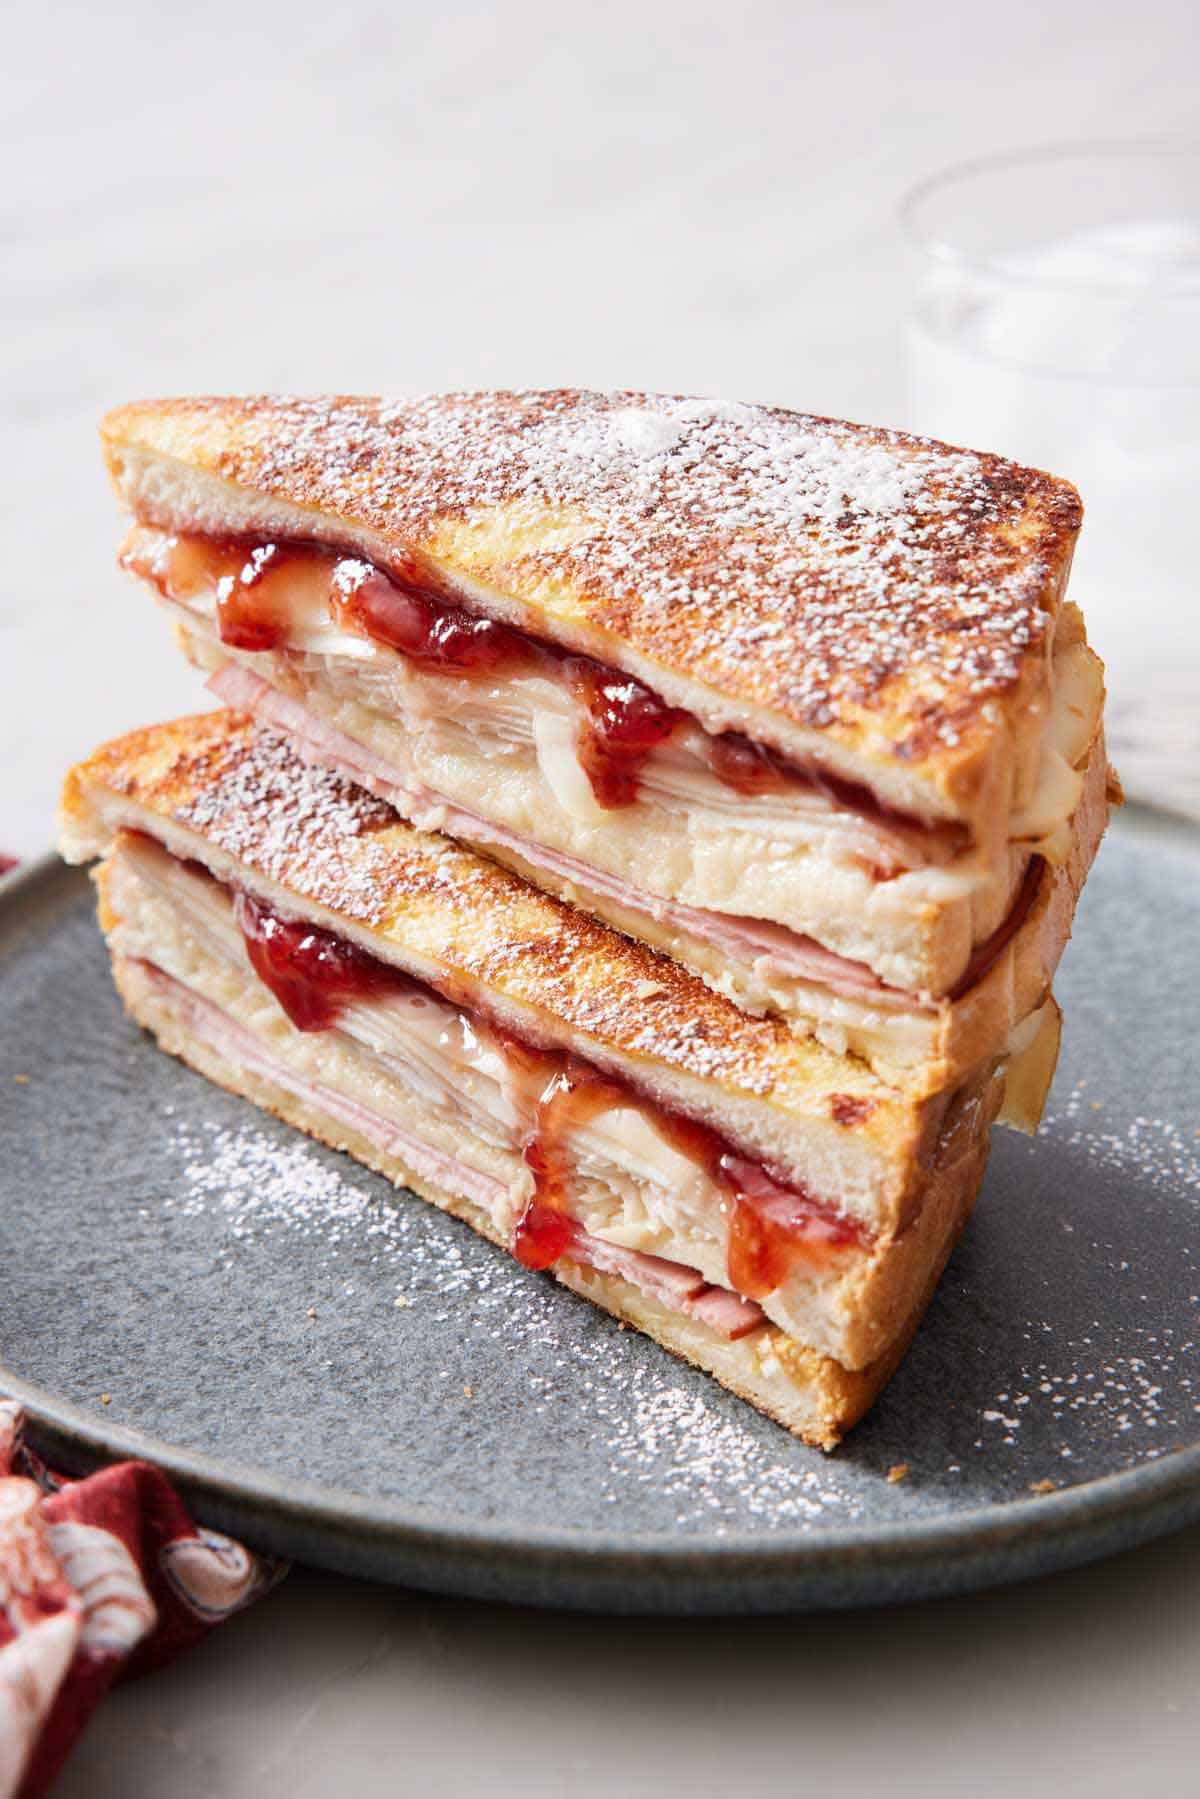 A plate with two halves of a Monte Cristo sandwich stacked on top of each other and dusted in powdered sugar.